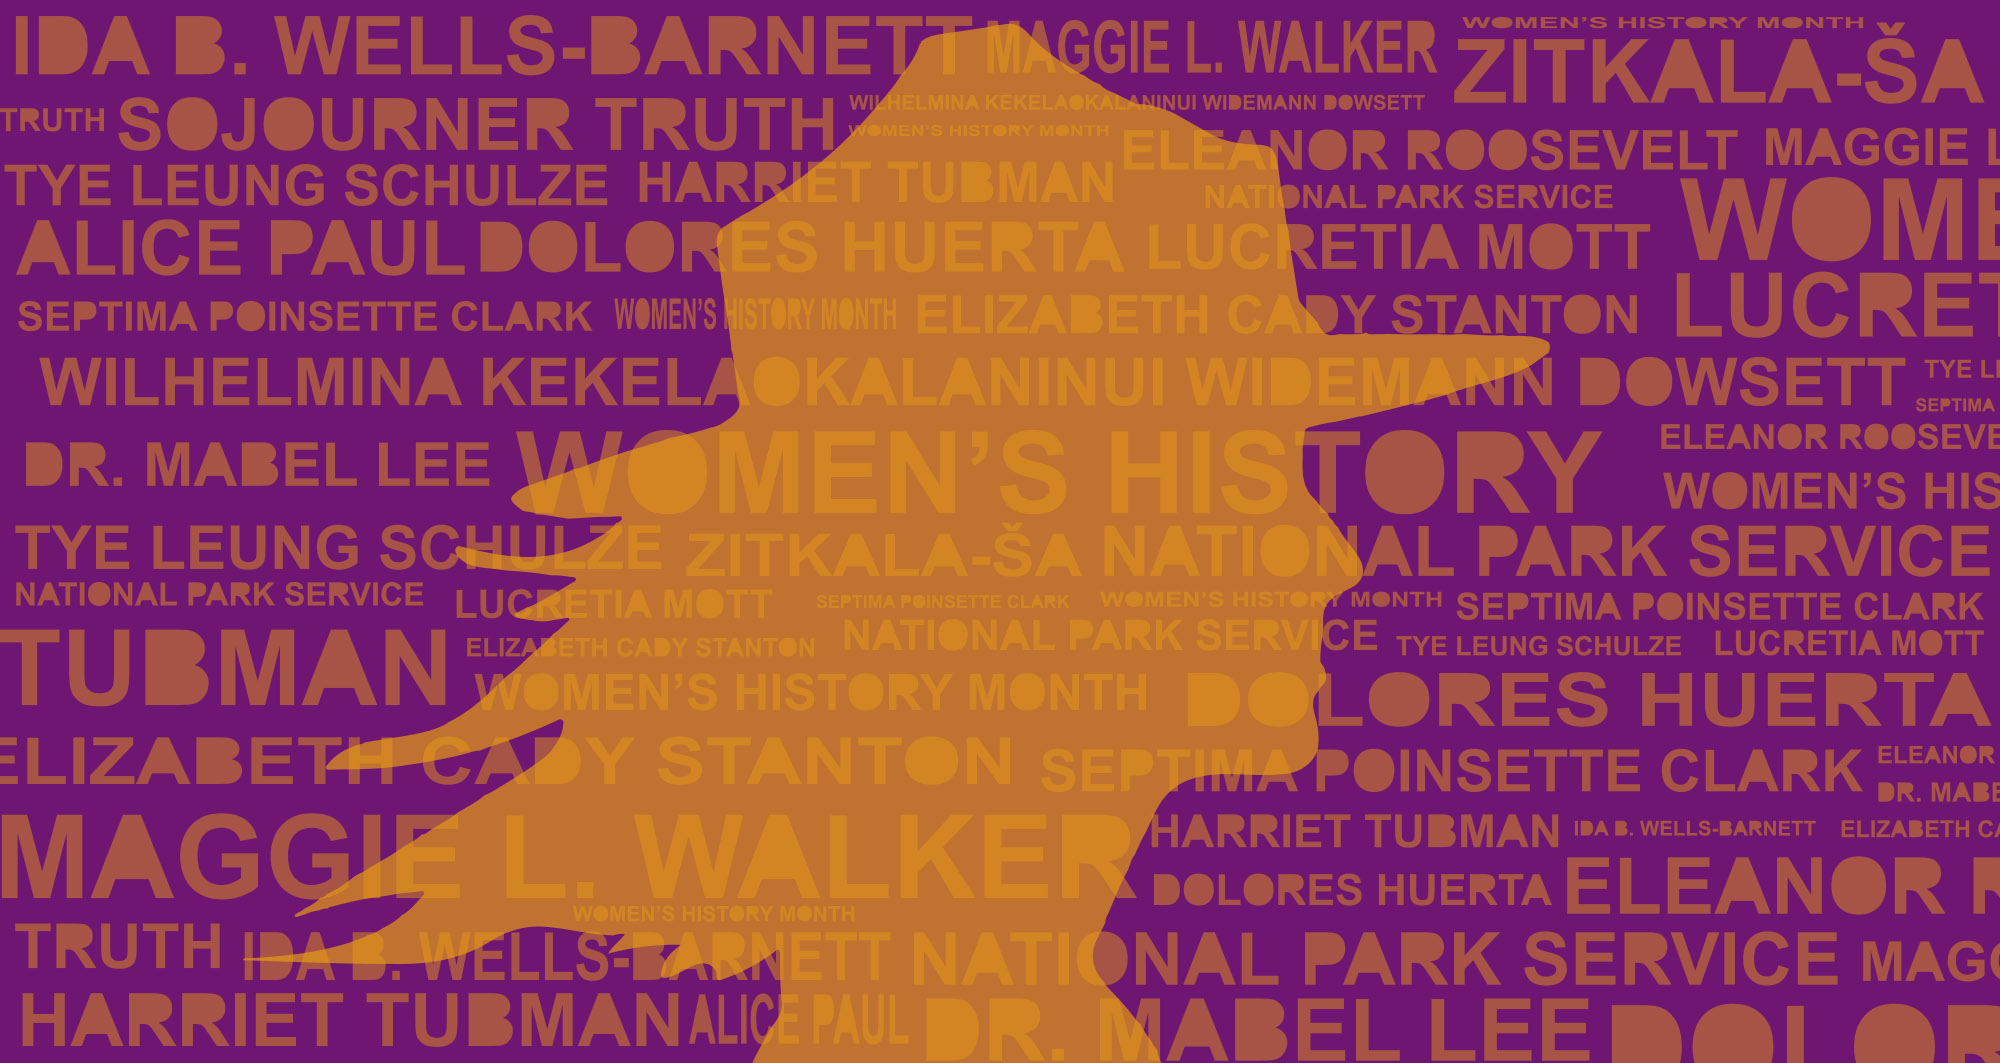 Women's History Month - NPS Commemorations and Celebrations (U.S.